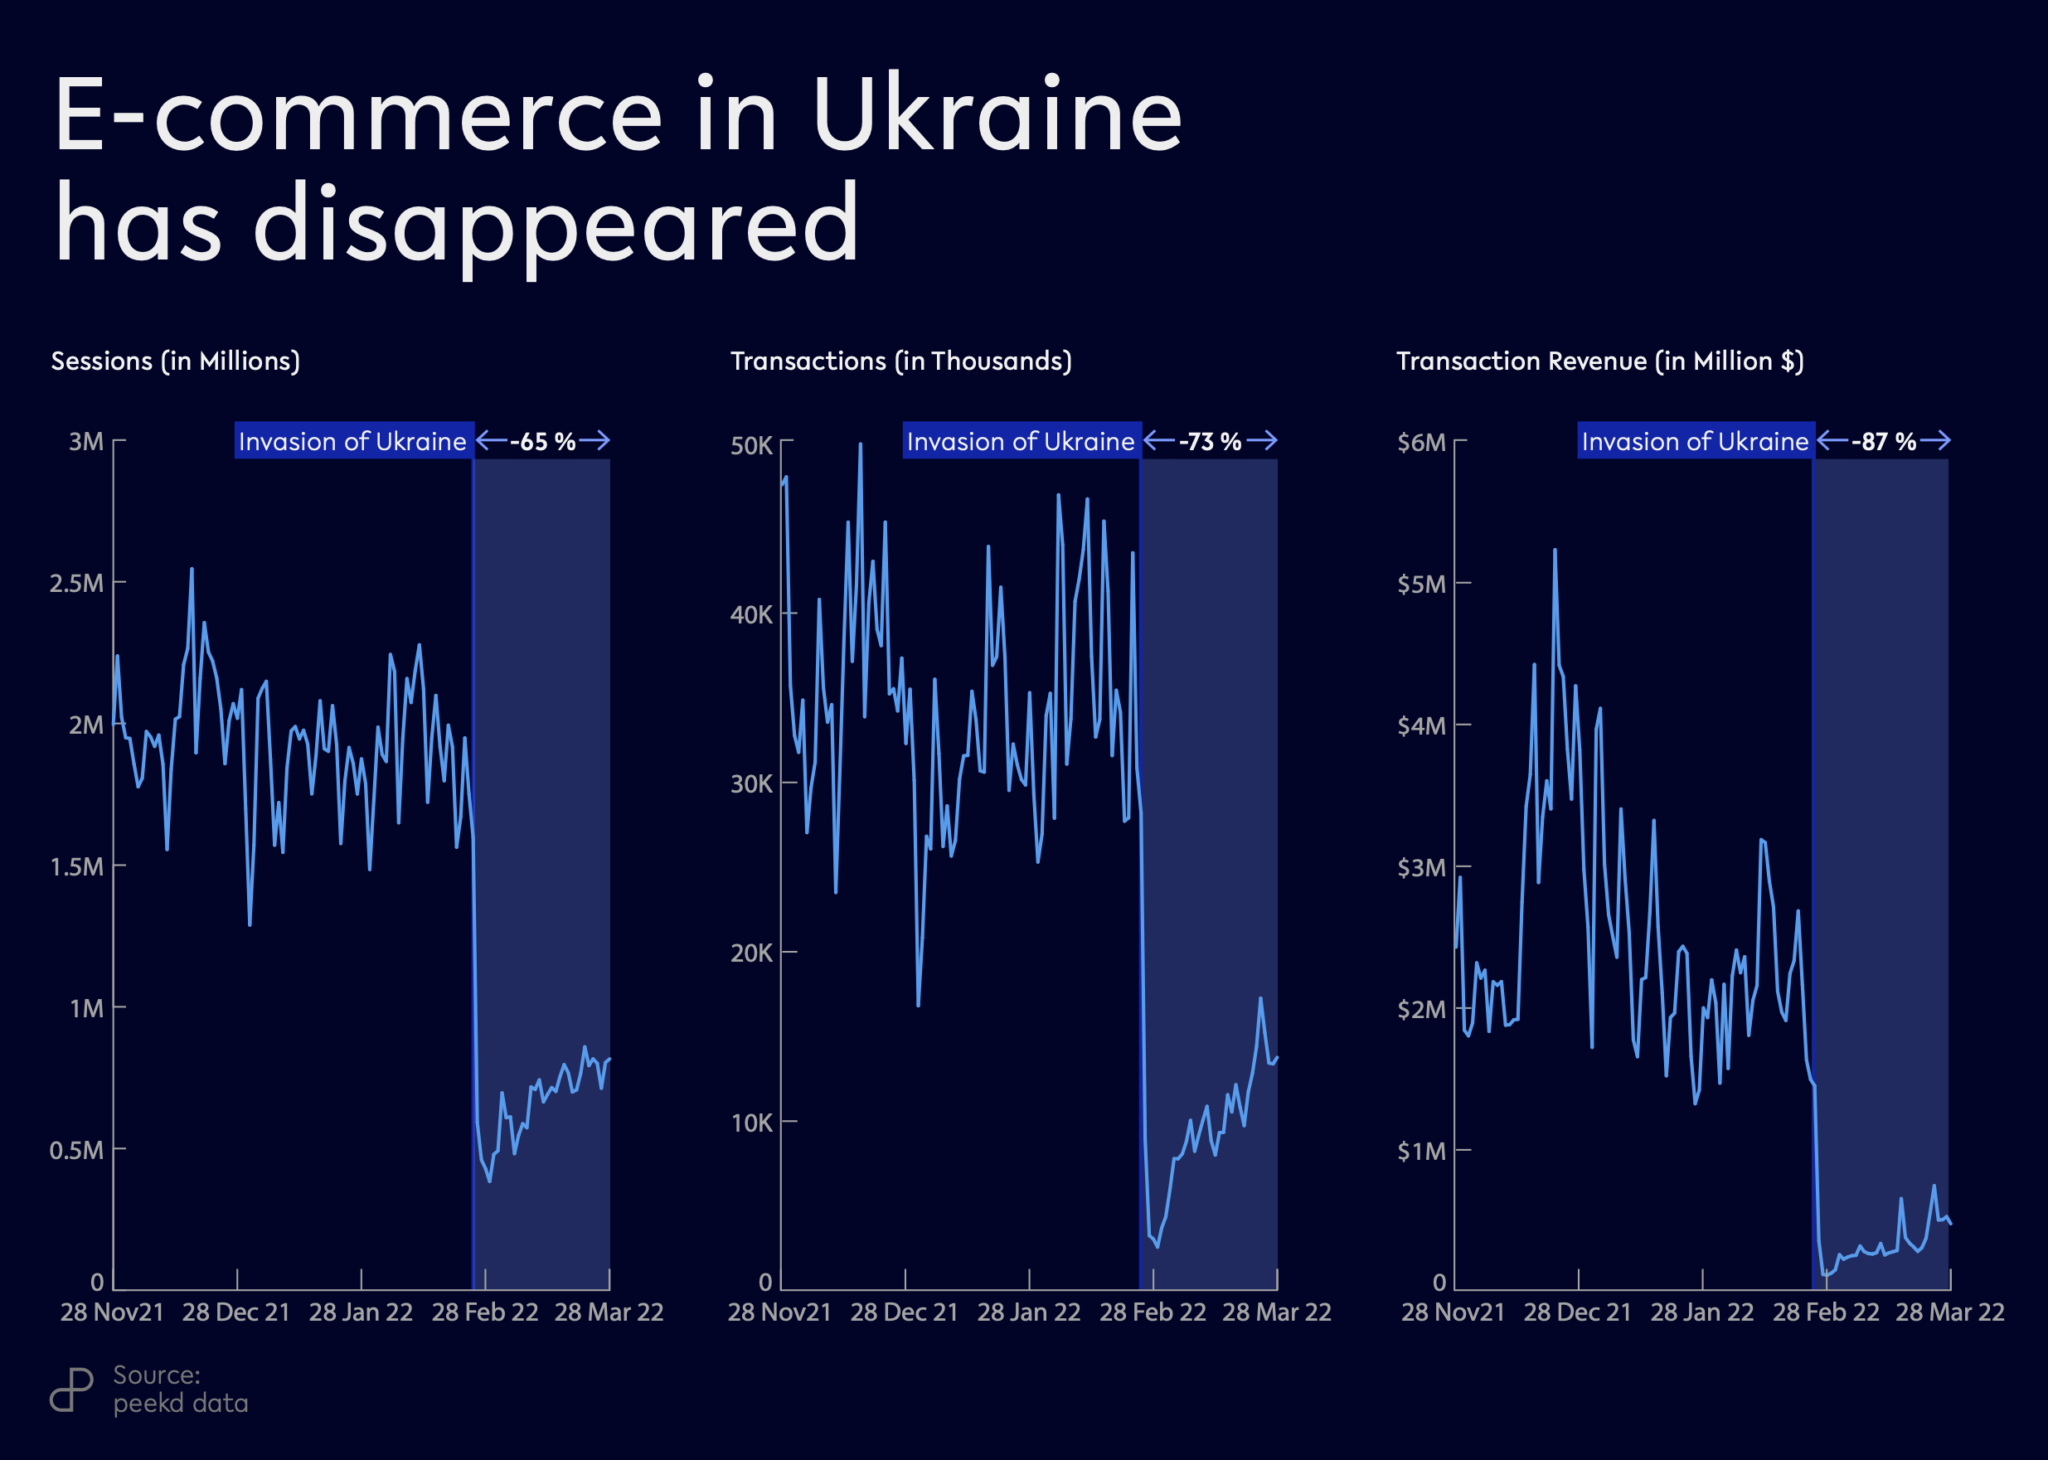 chart ecommerce sessions, transactions and revenue in ukraine